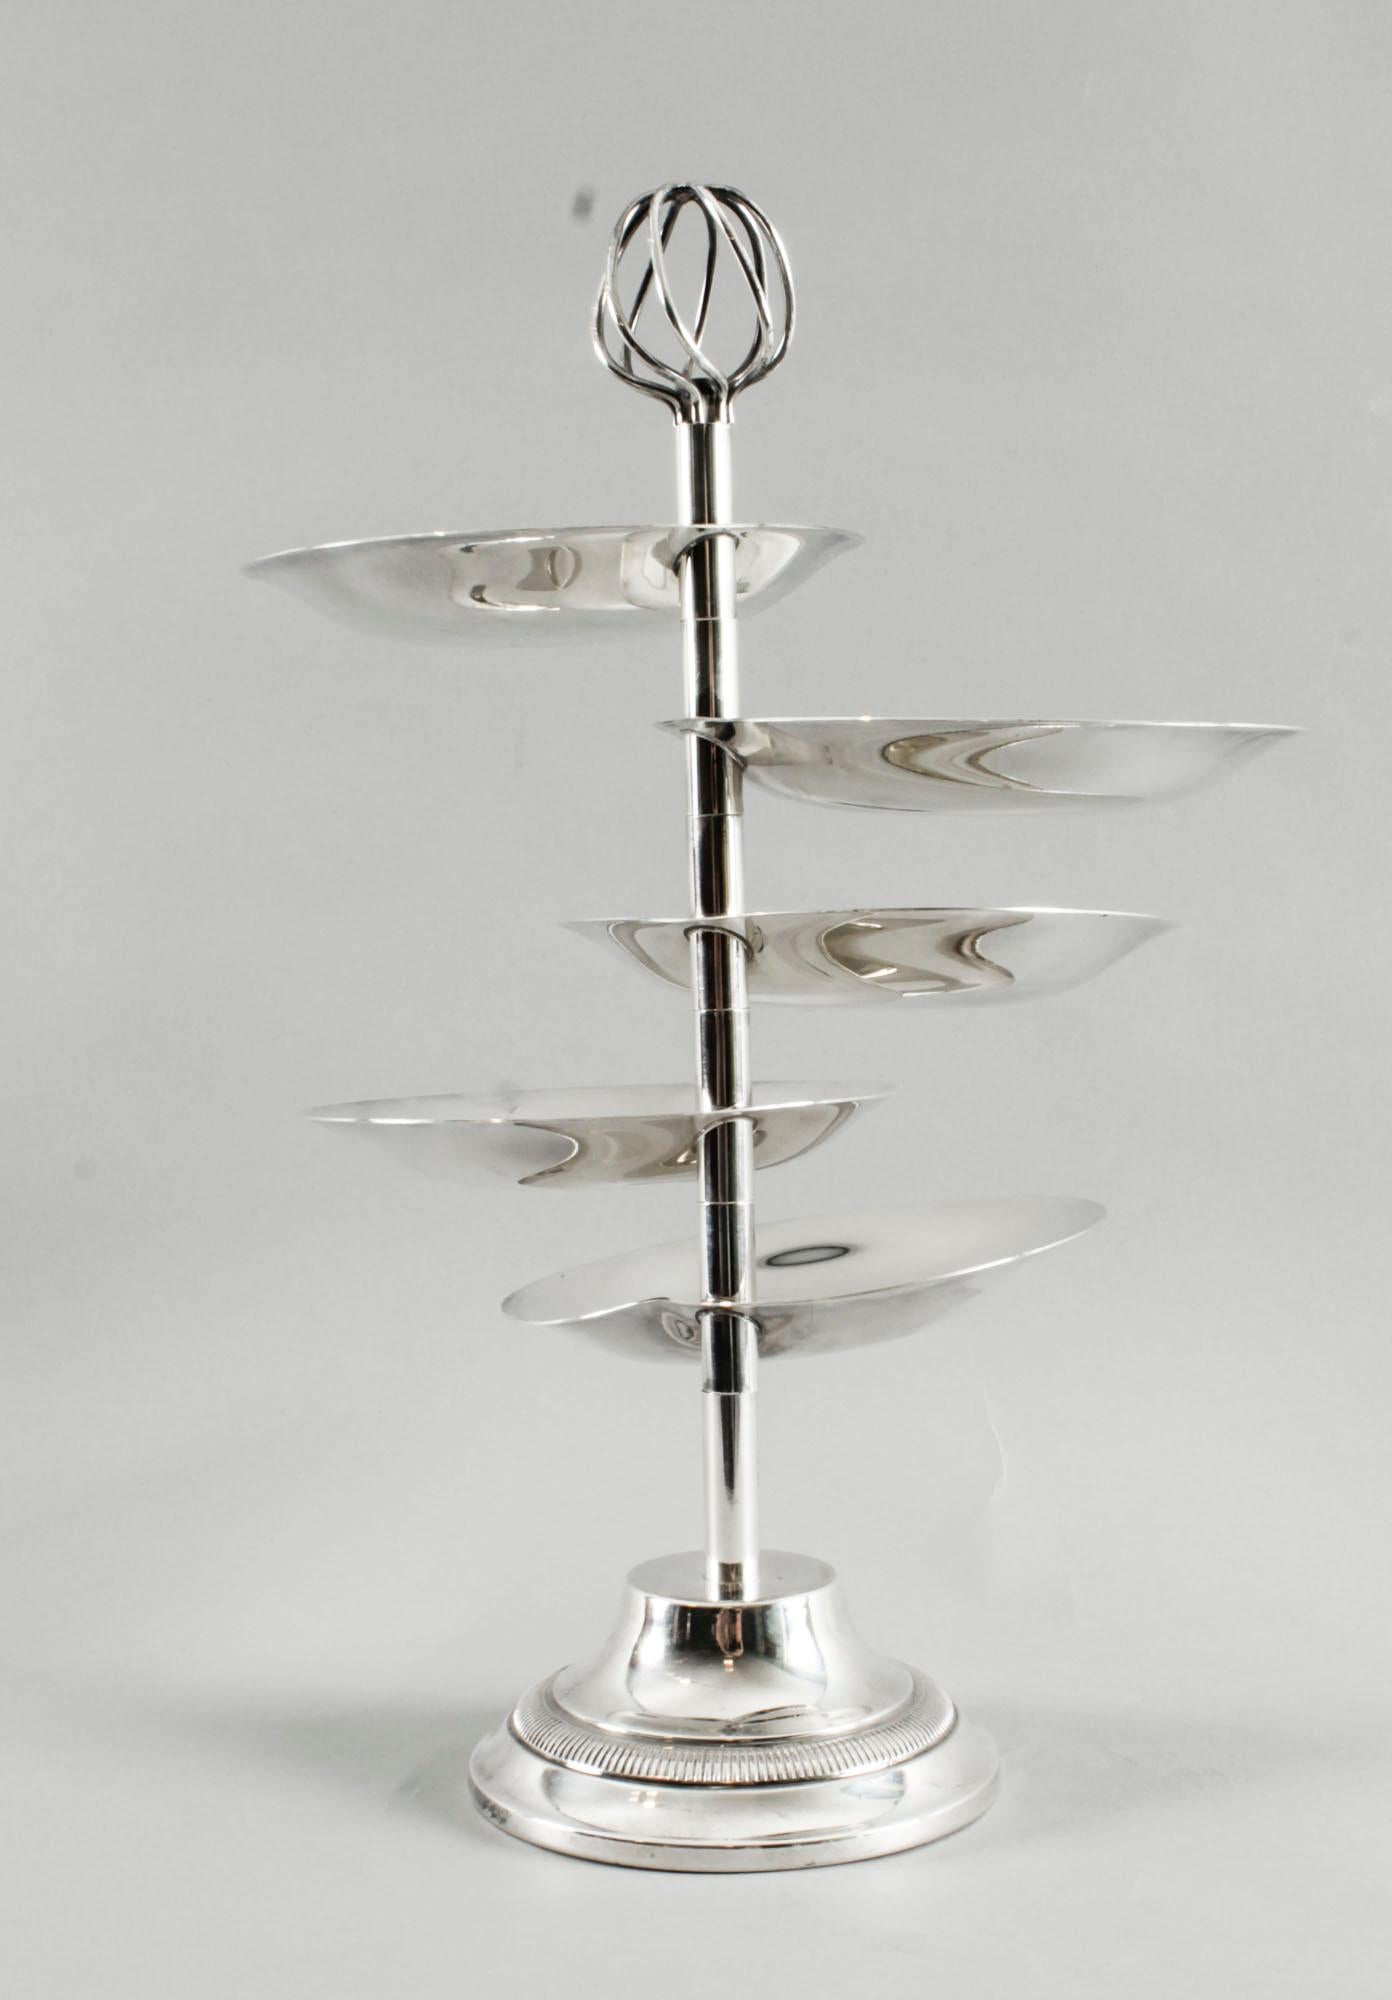 Antique Silver Plated Hors d'oeuvres Stand by Christofle 19th C. en vente 2